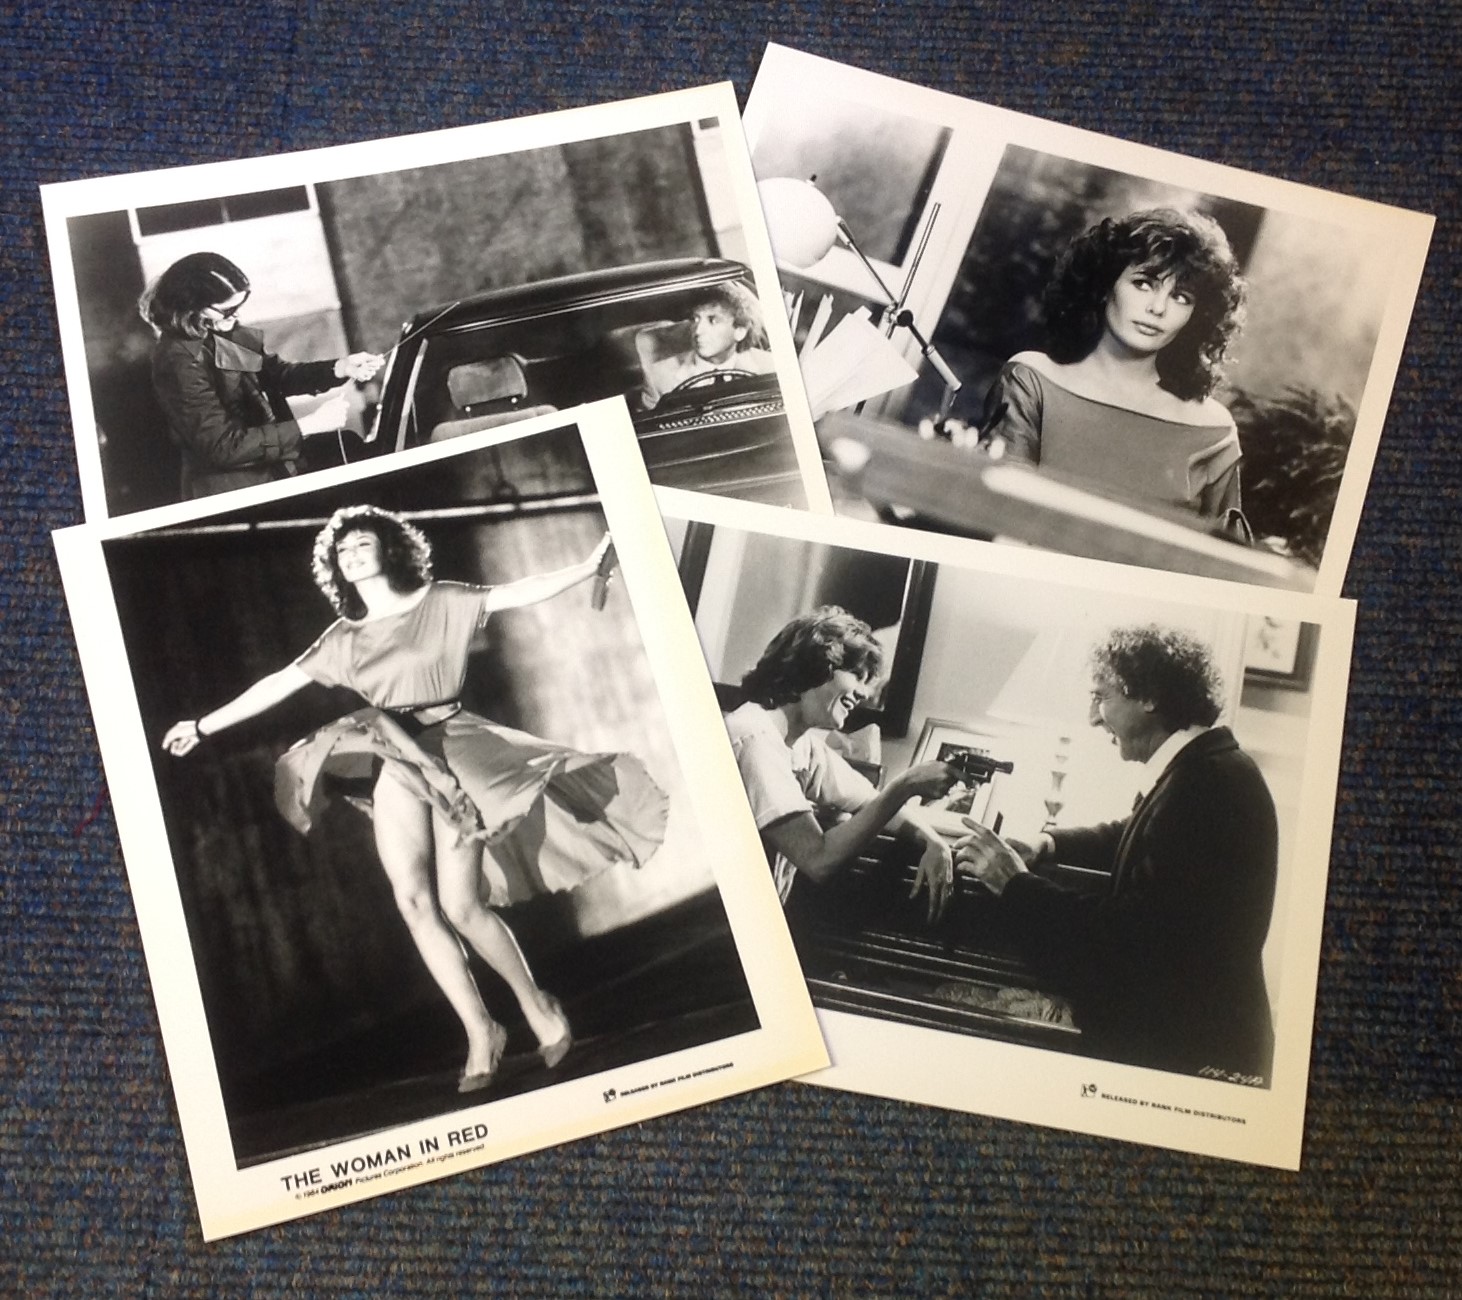 The Woman in Red collection of 4 lobby cards from the 1984 Romantic comedy film directed by and